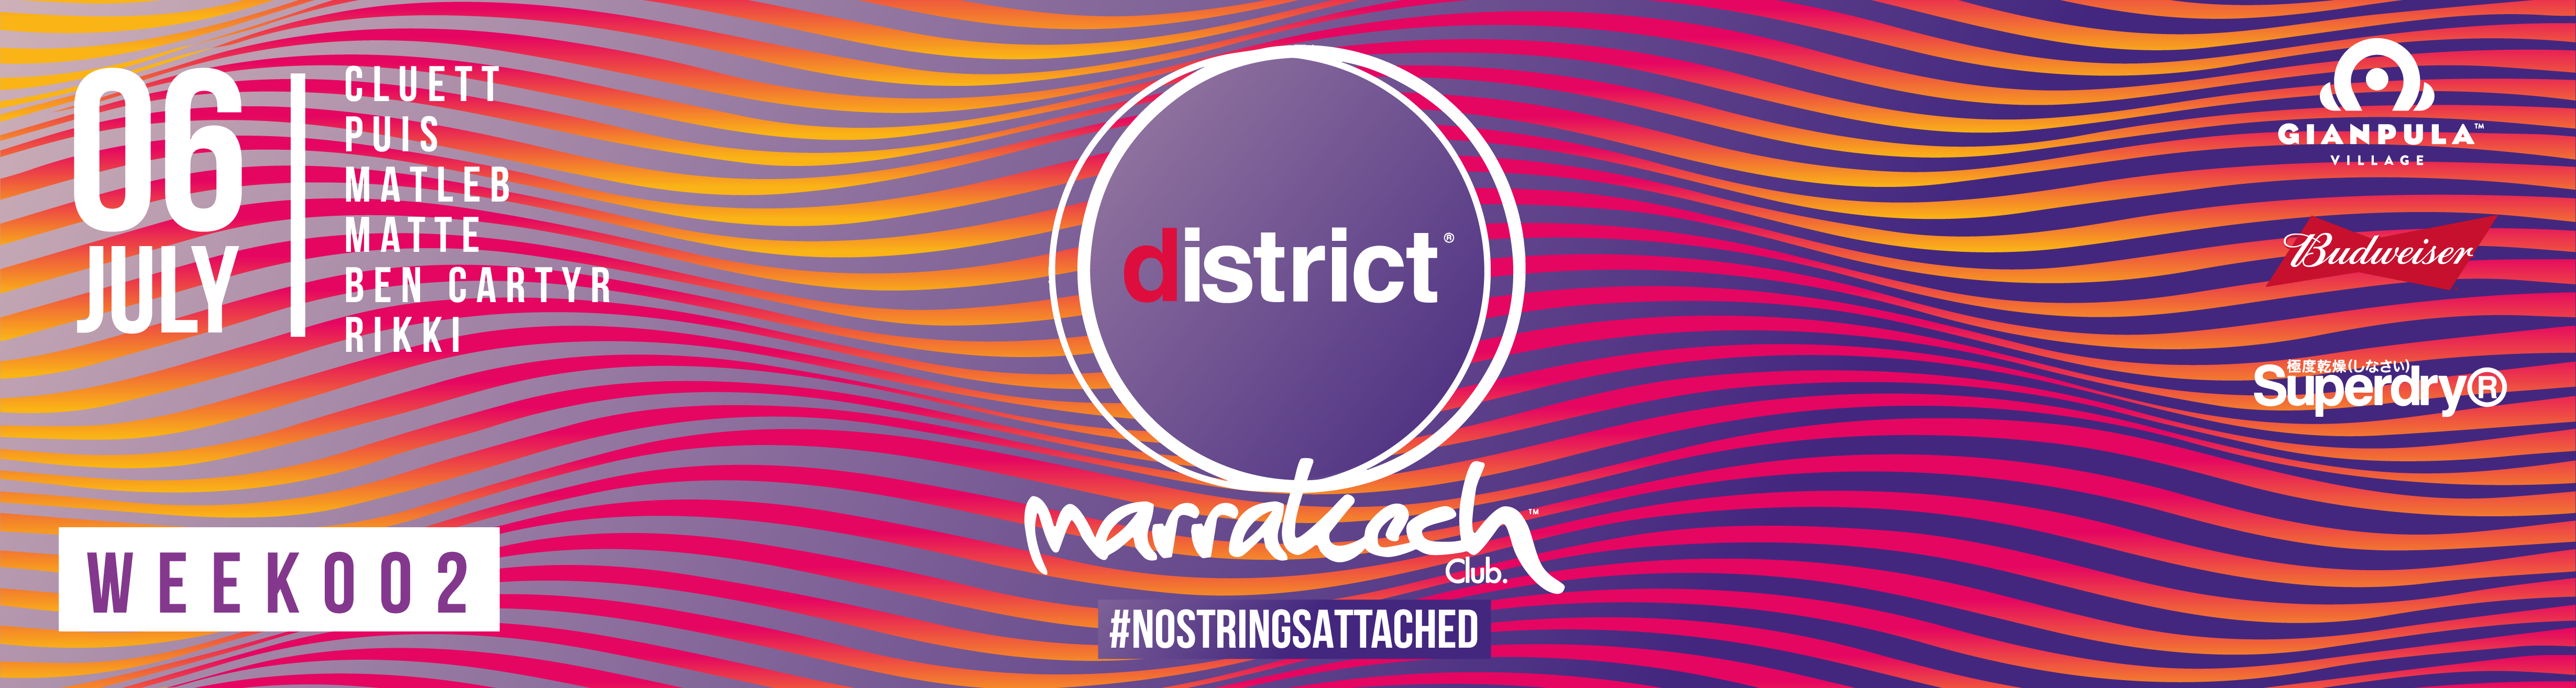 District - wk002 [Every Friday // Marrakech Club]